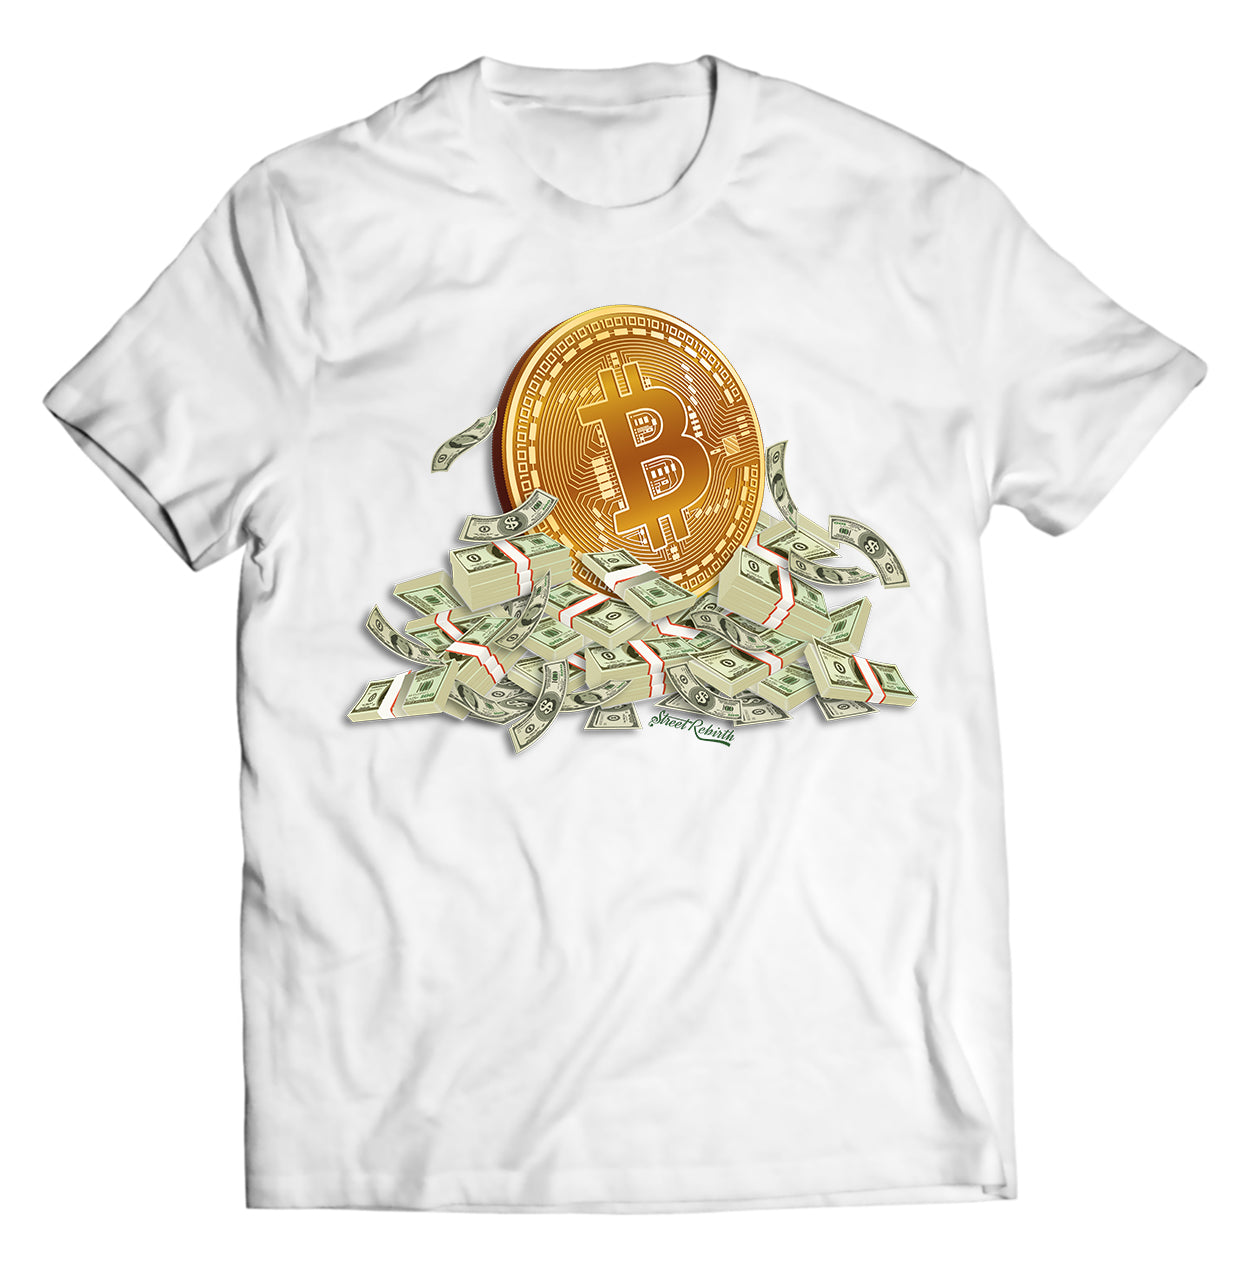 Bitcoin Shirt - Direct To Garment Quality Print - Unisex Shirt - Gift For Him or Her